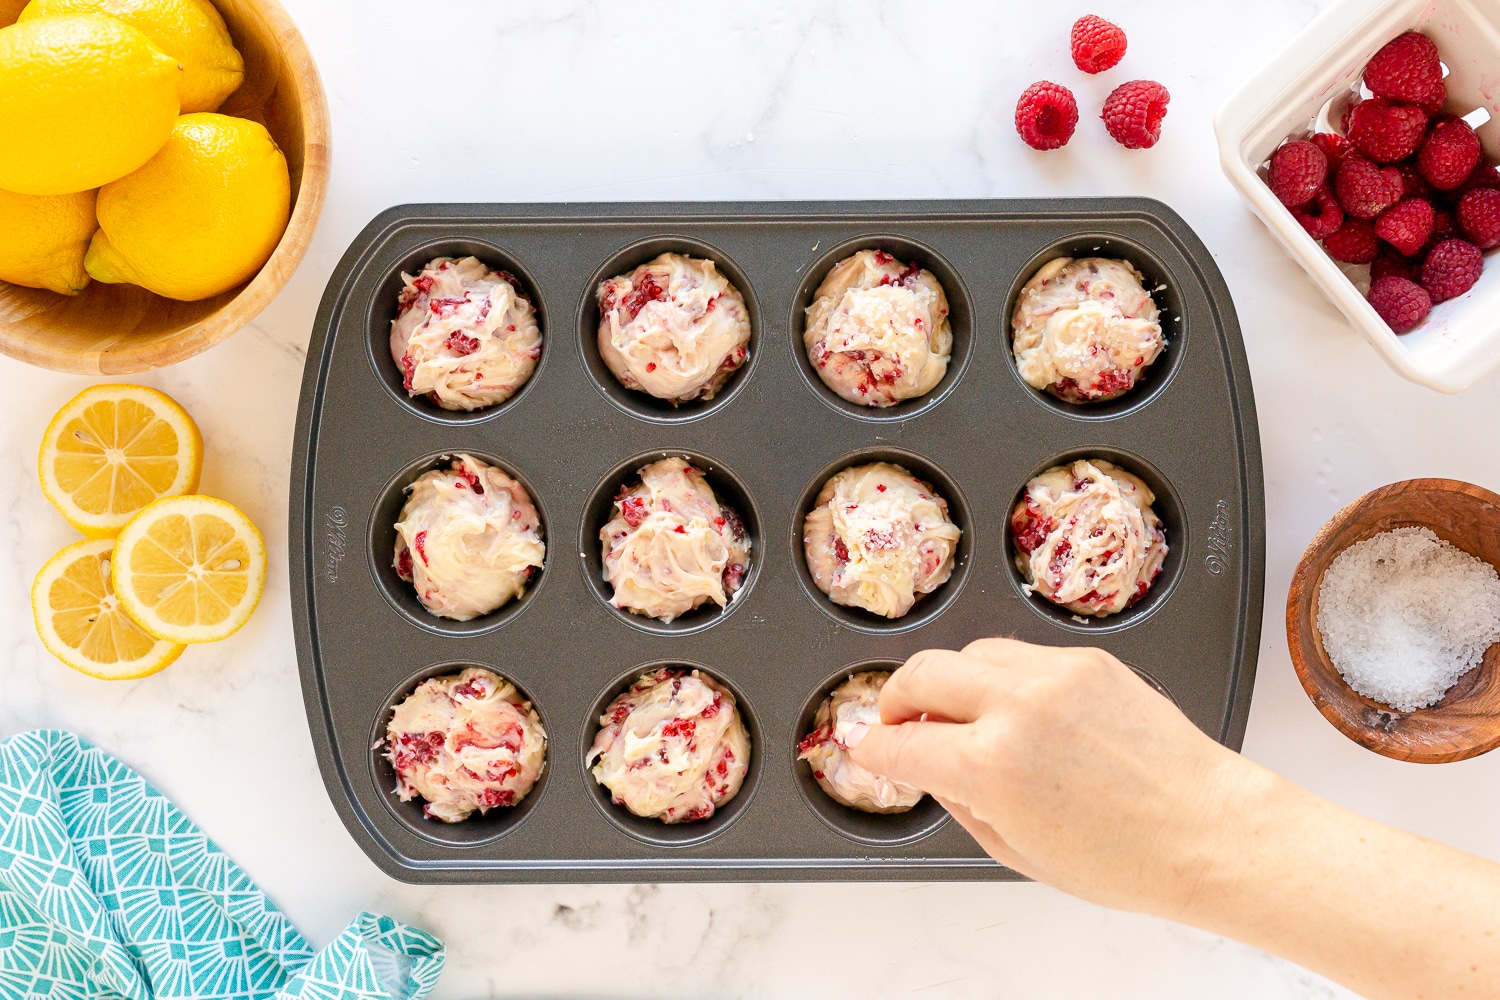 sprinkle coarse sugar on top of batter in muffin tin